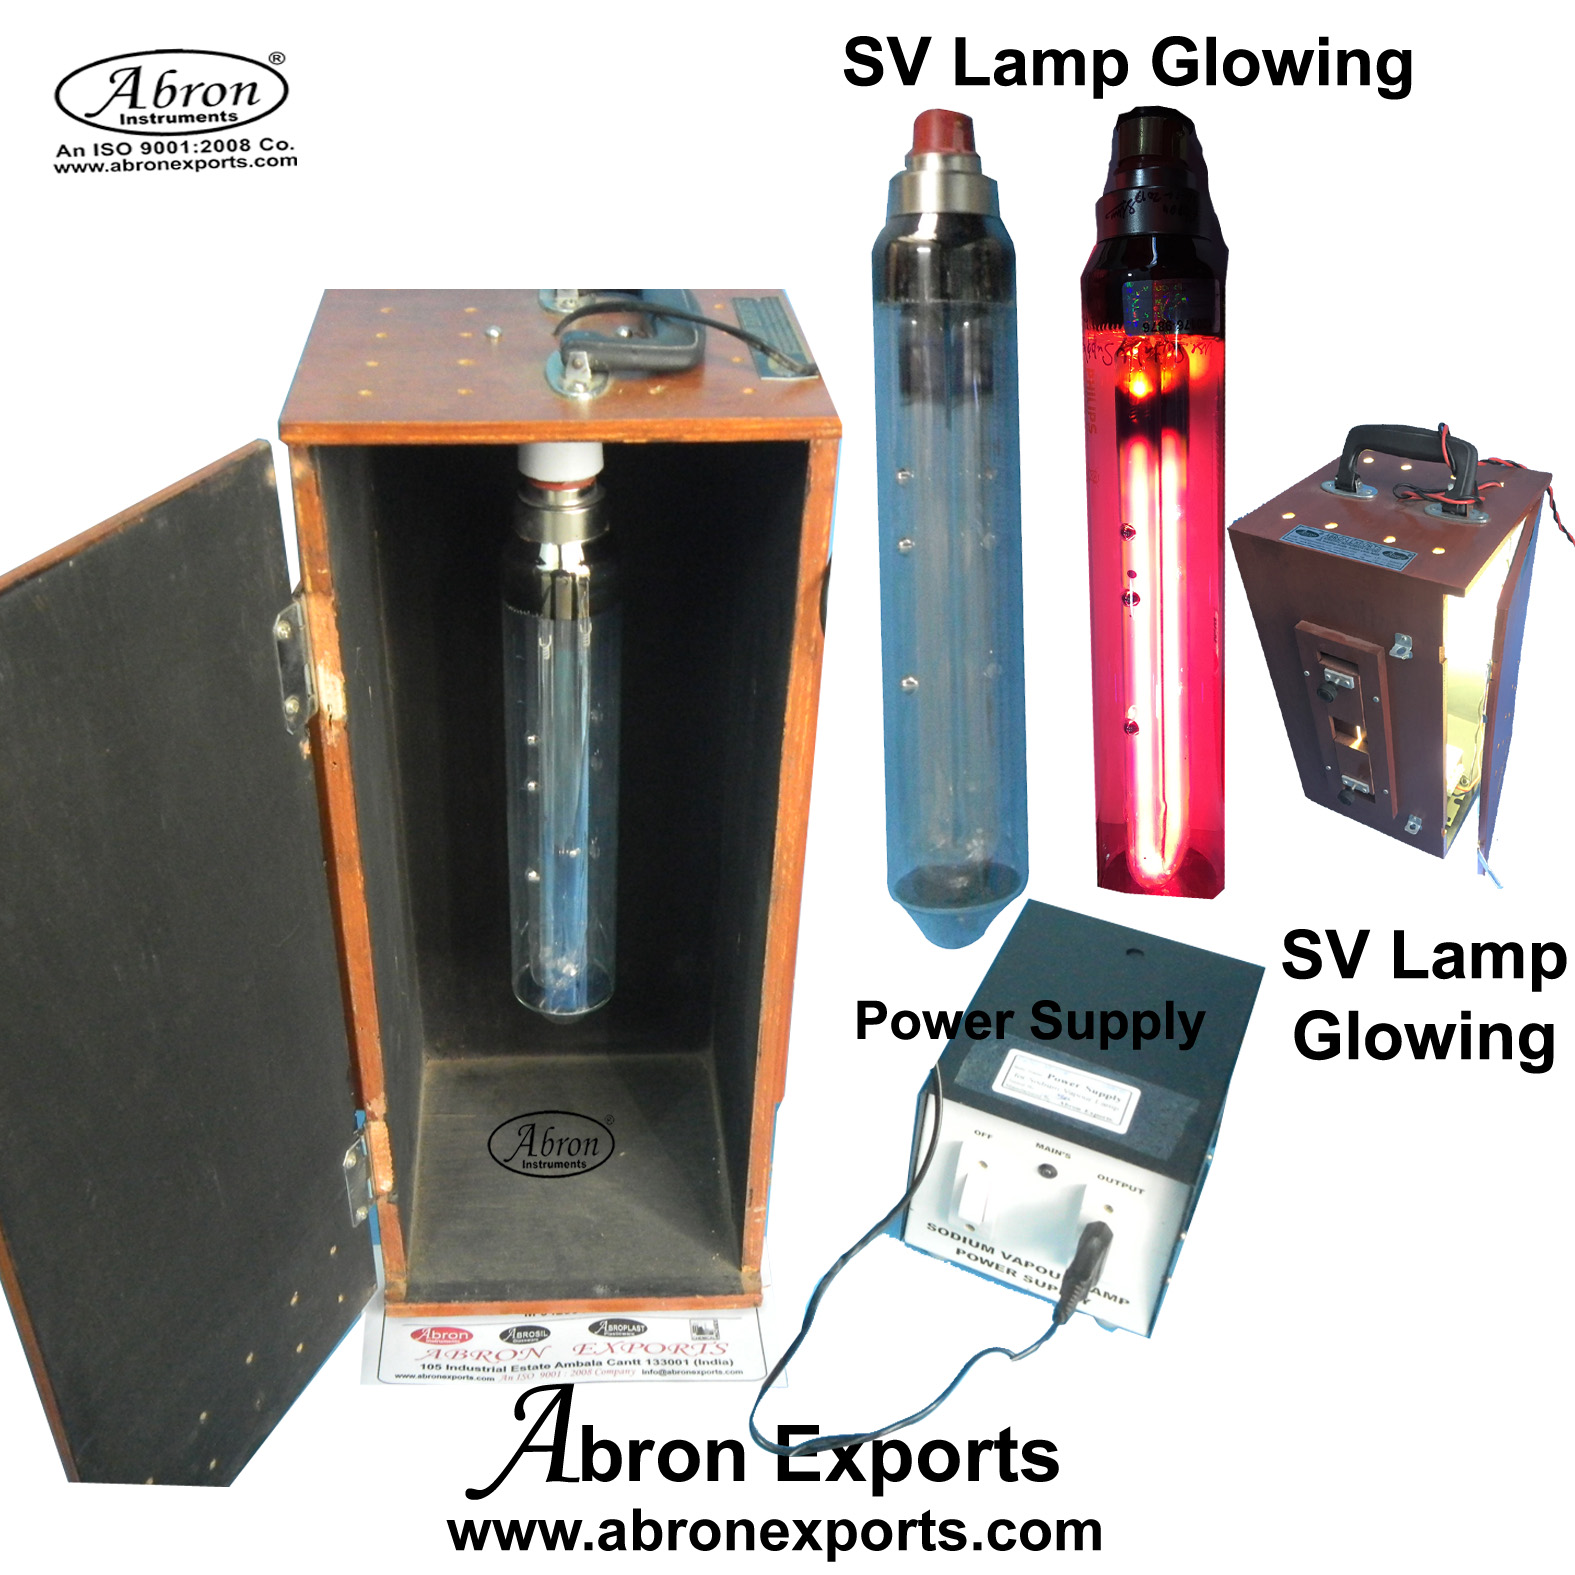 Brewsters angle set up spare SV lamp 35 with Sodium vapour lamp , holder wire, box slit supply AE-1215S  AP-911K